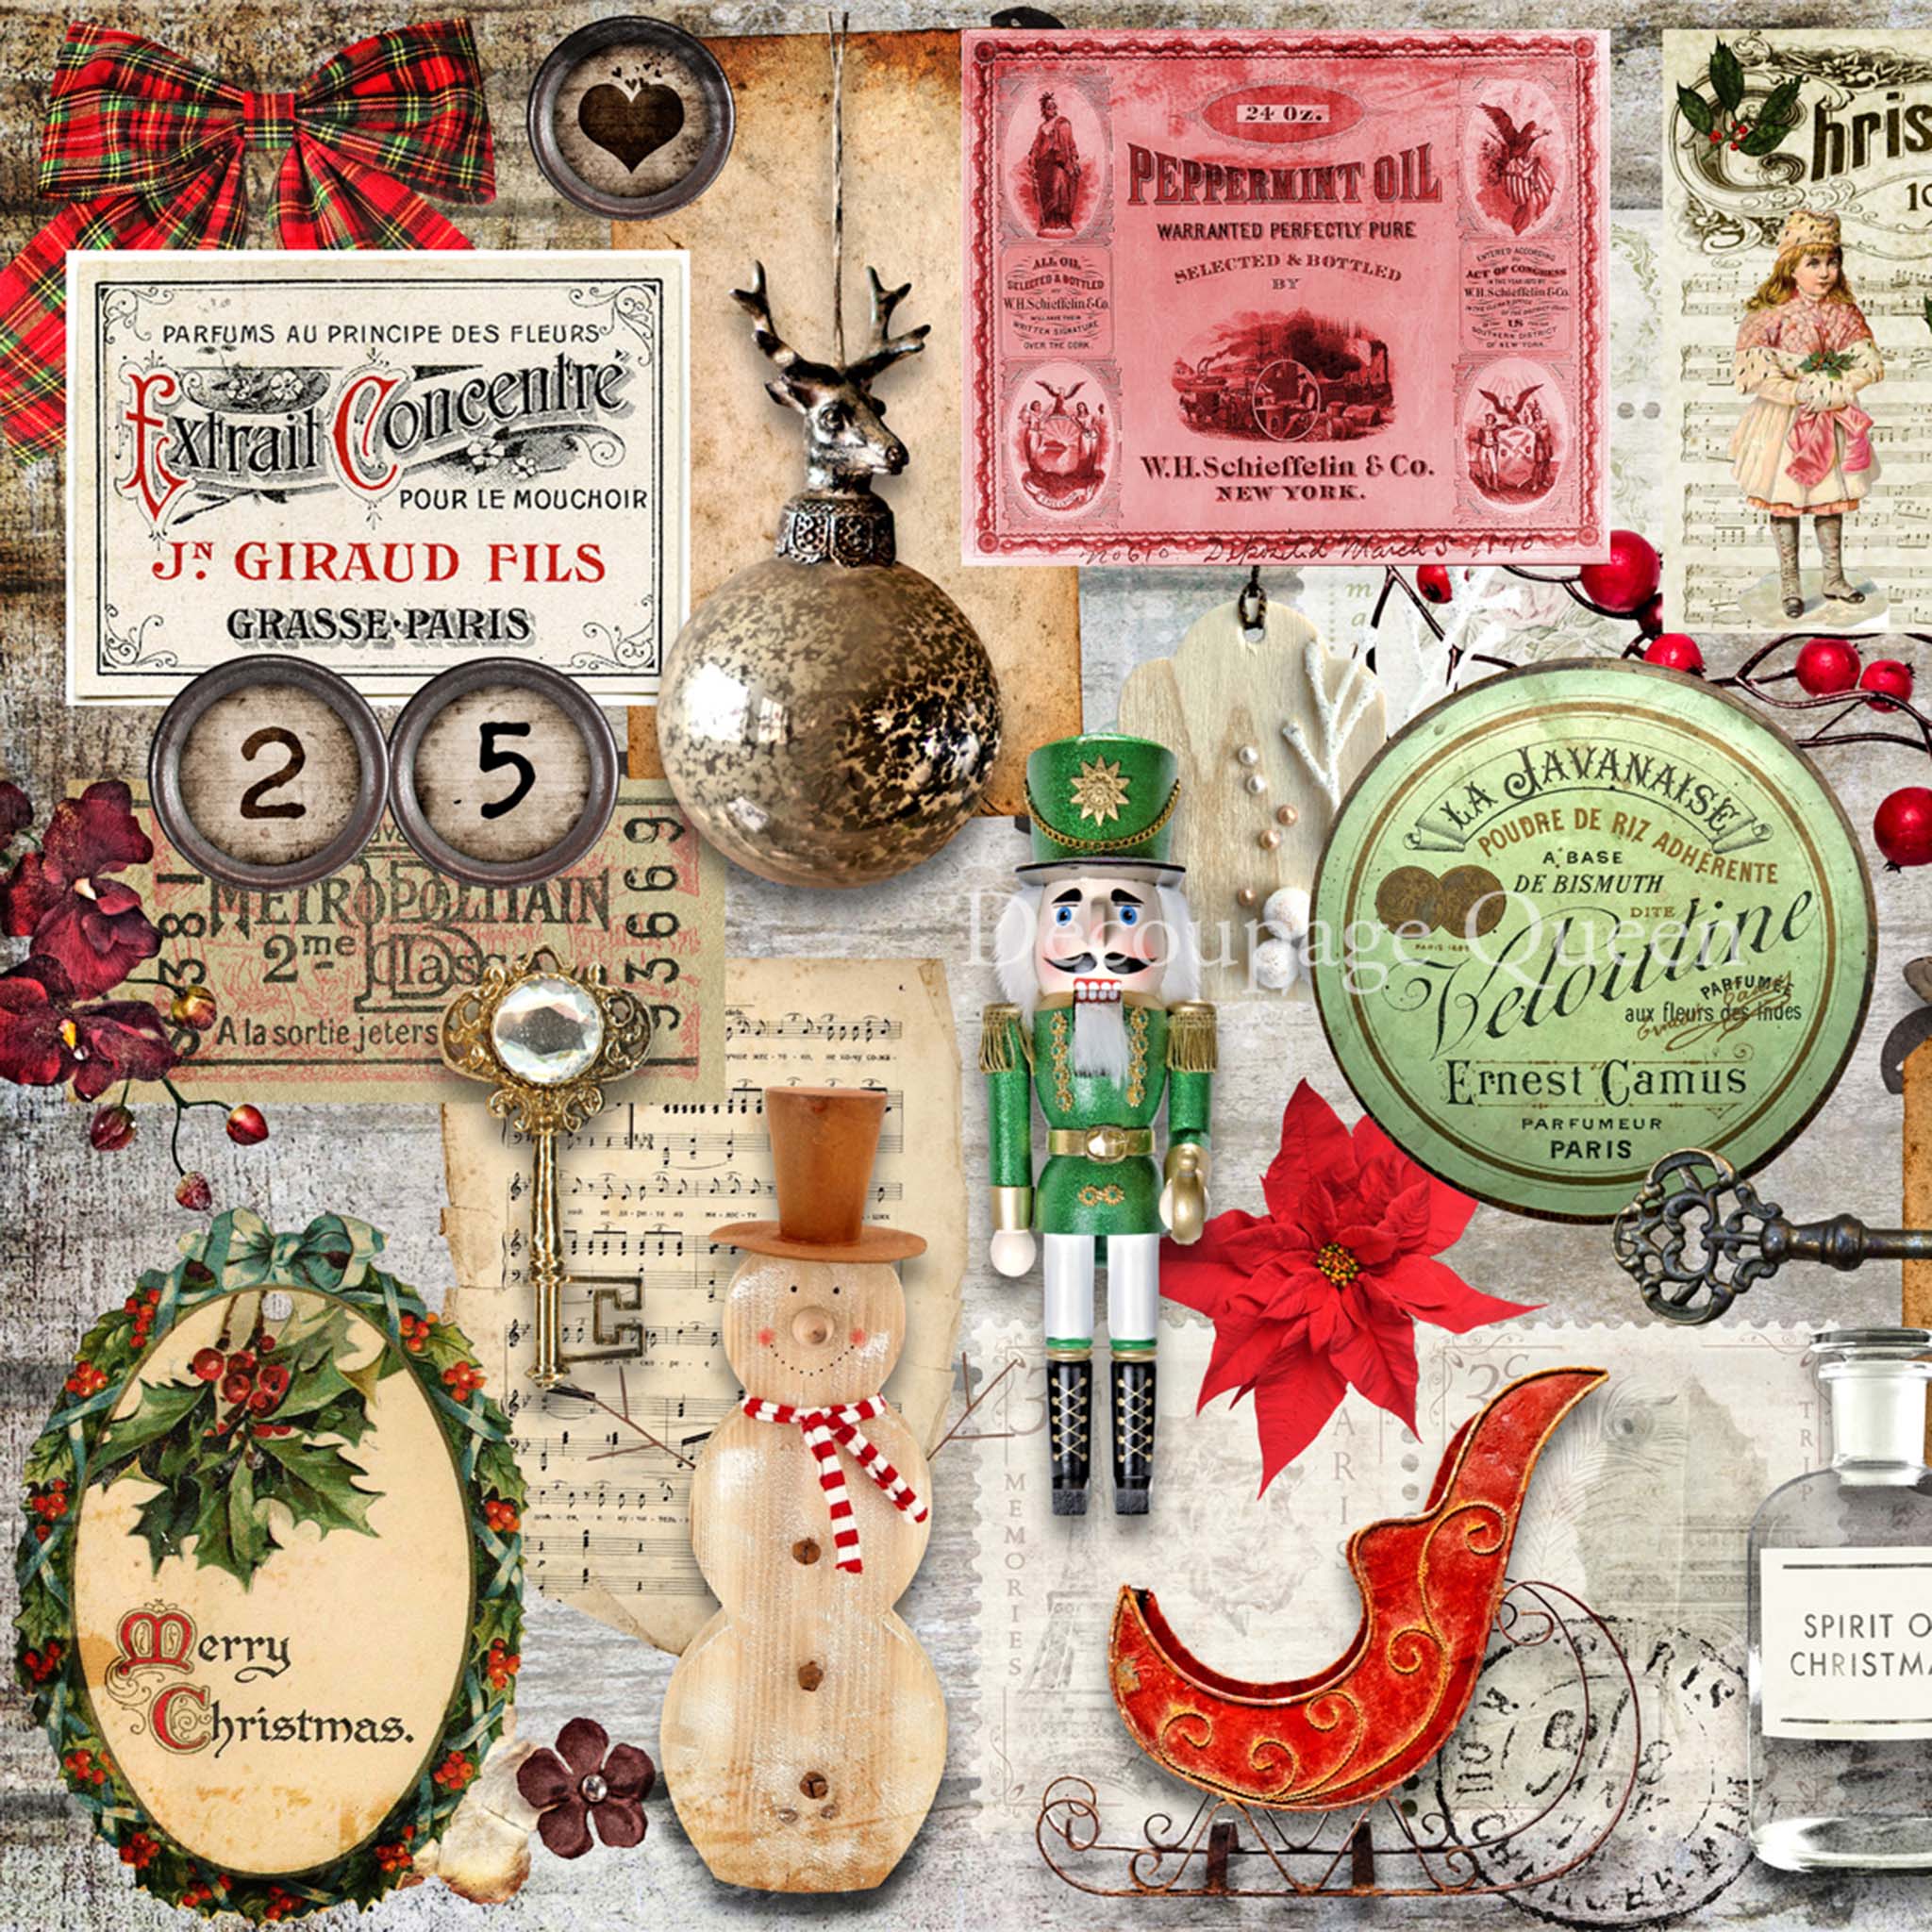 A3 rice paper that features a collage of vintage Christmas decorations, ornaments, and sheet music